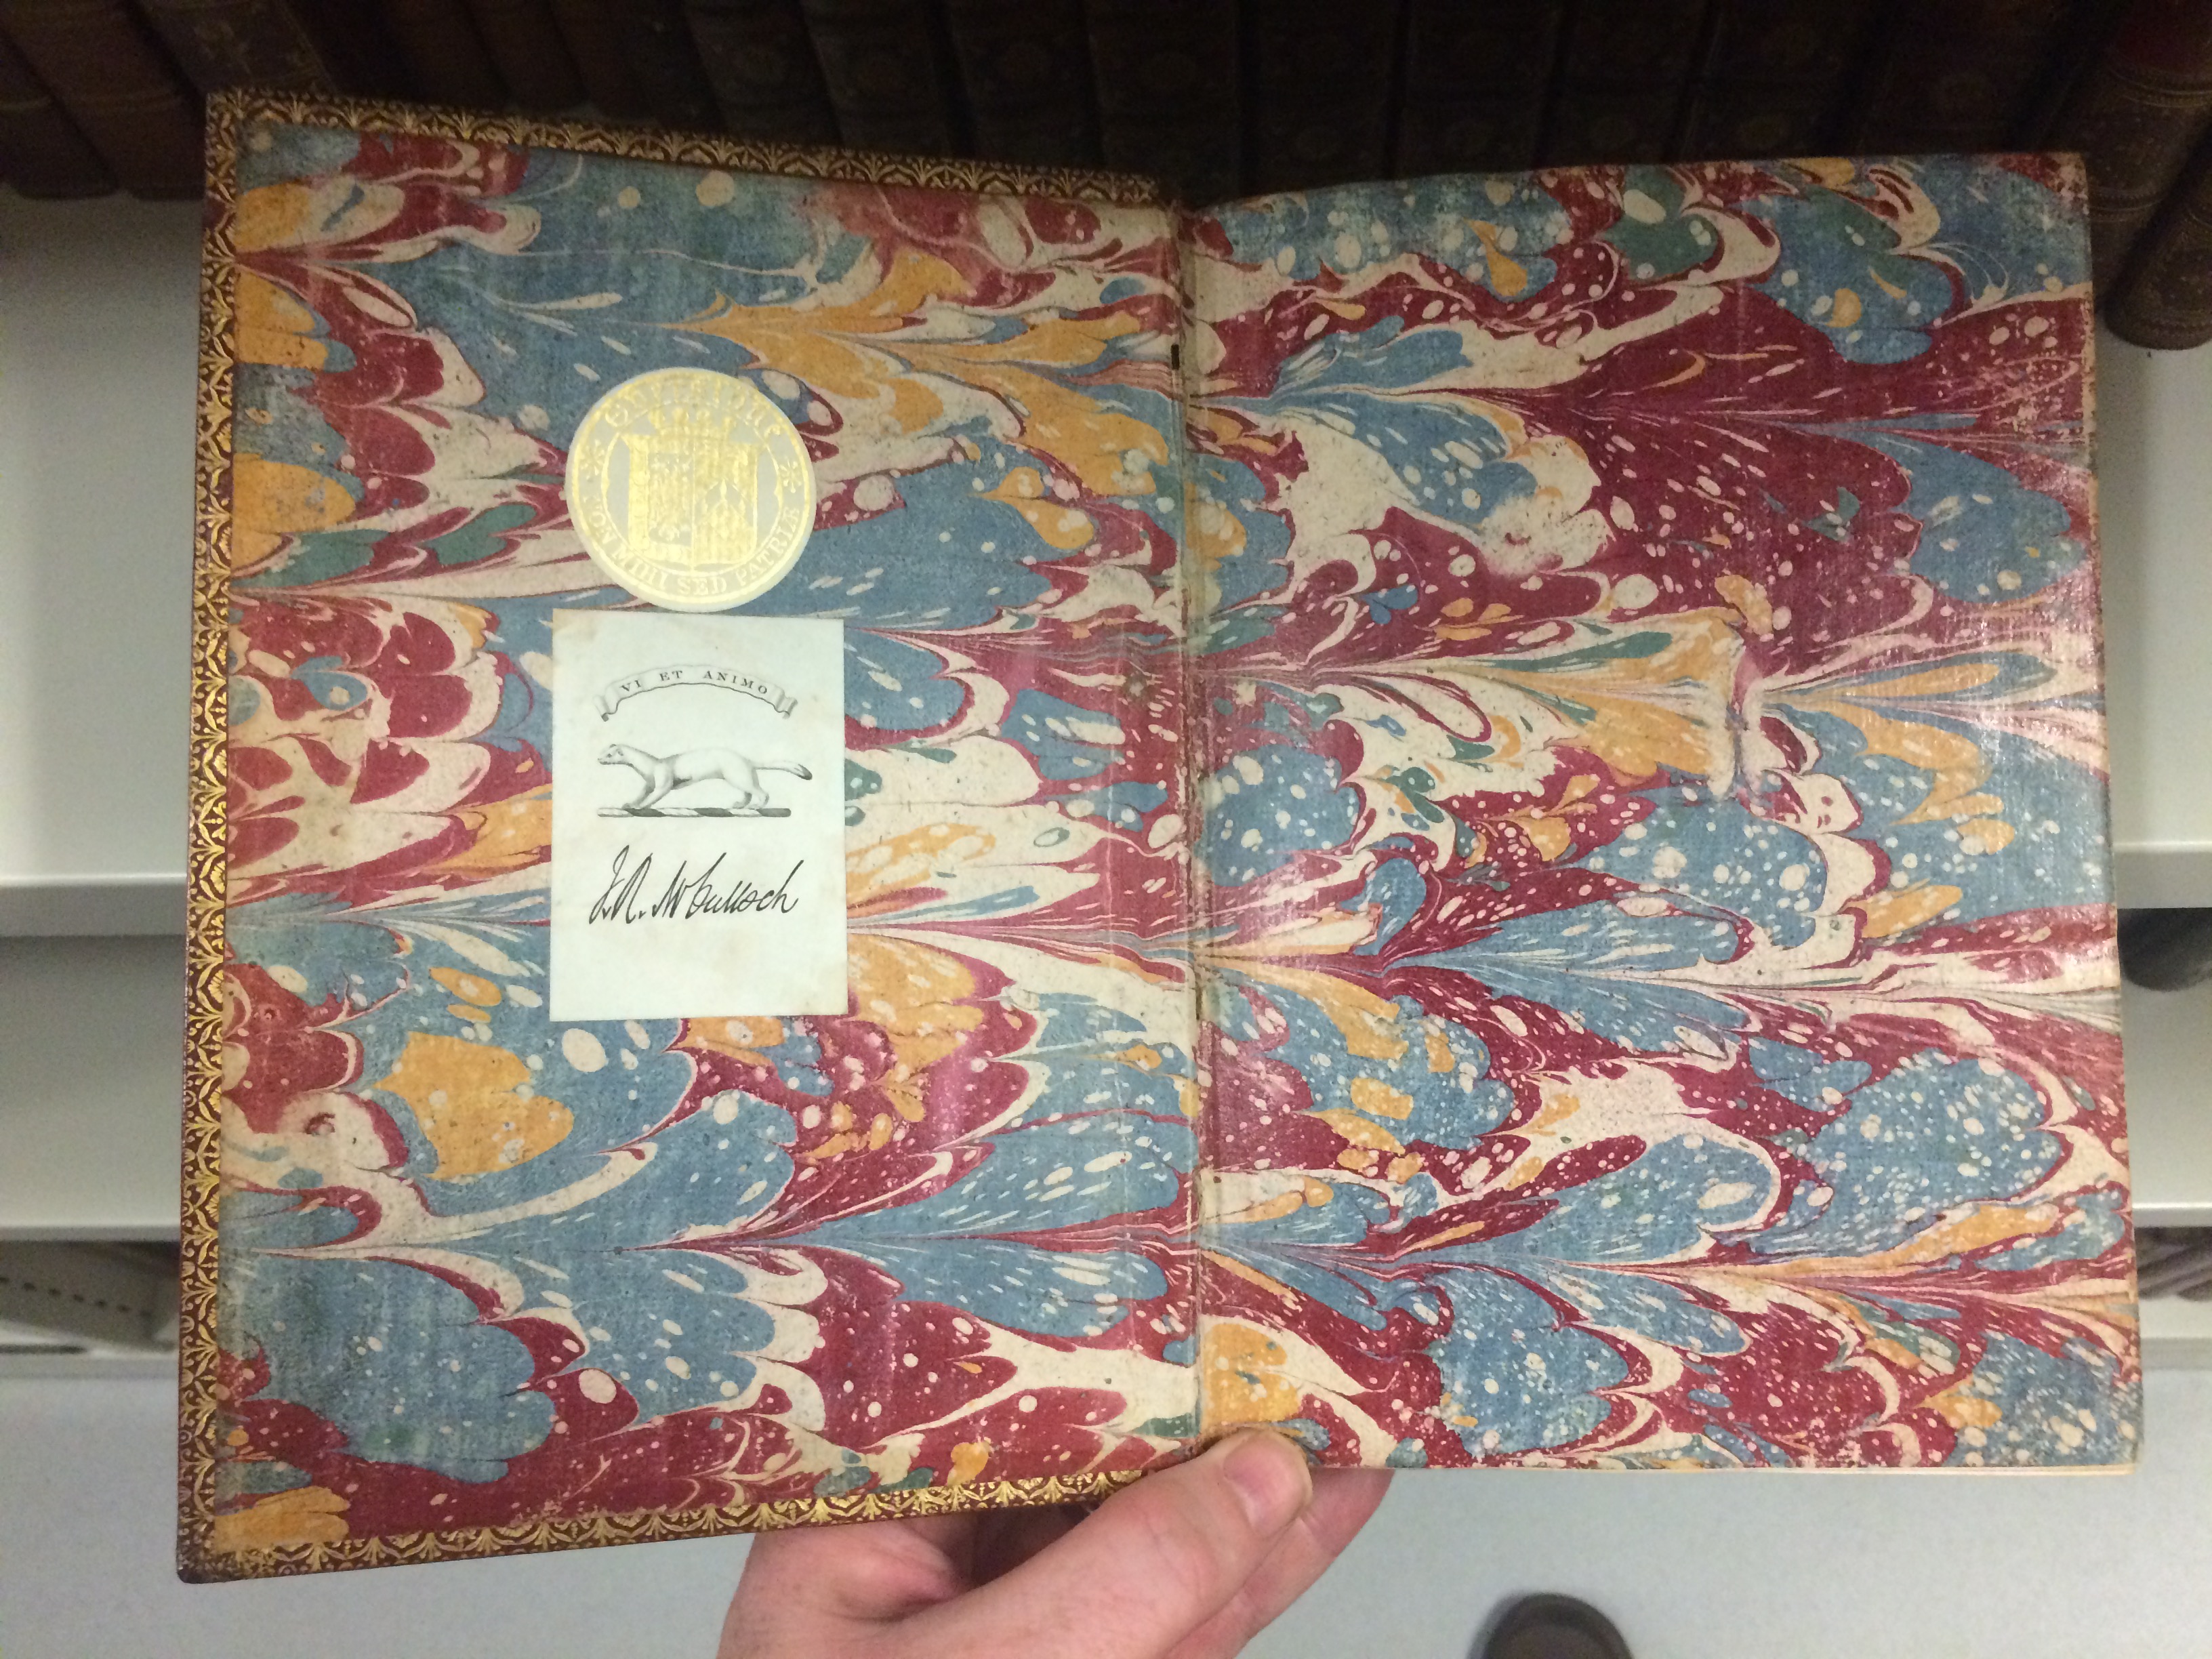 Marbled pages of a book.